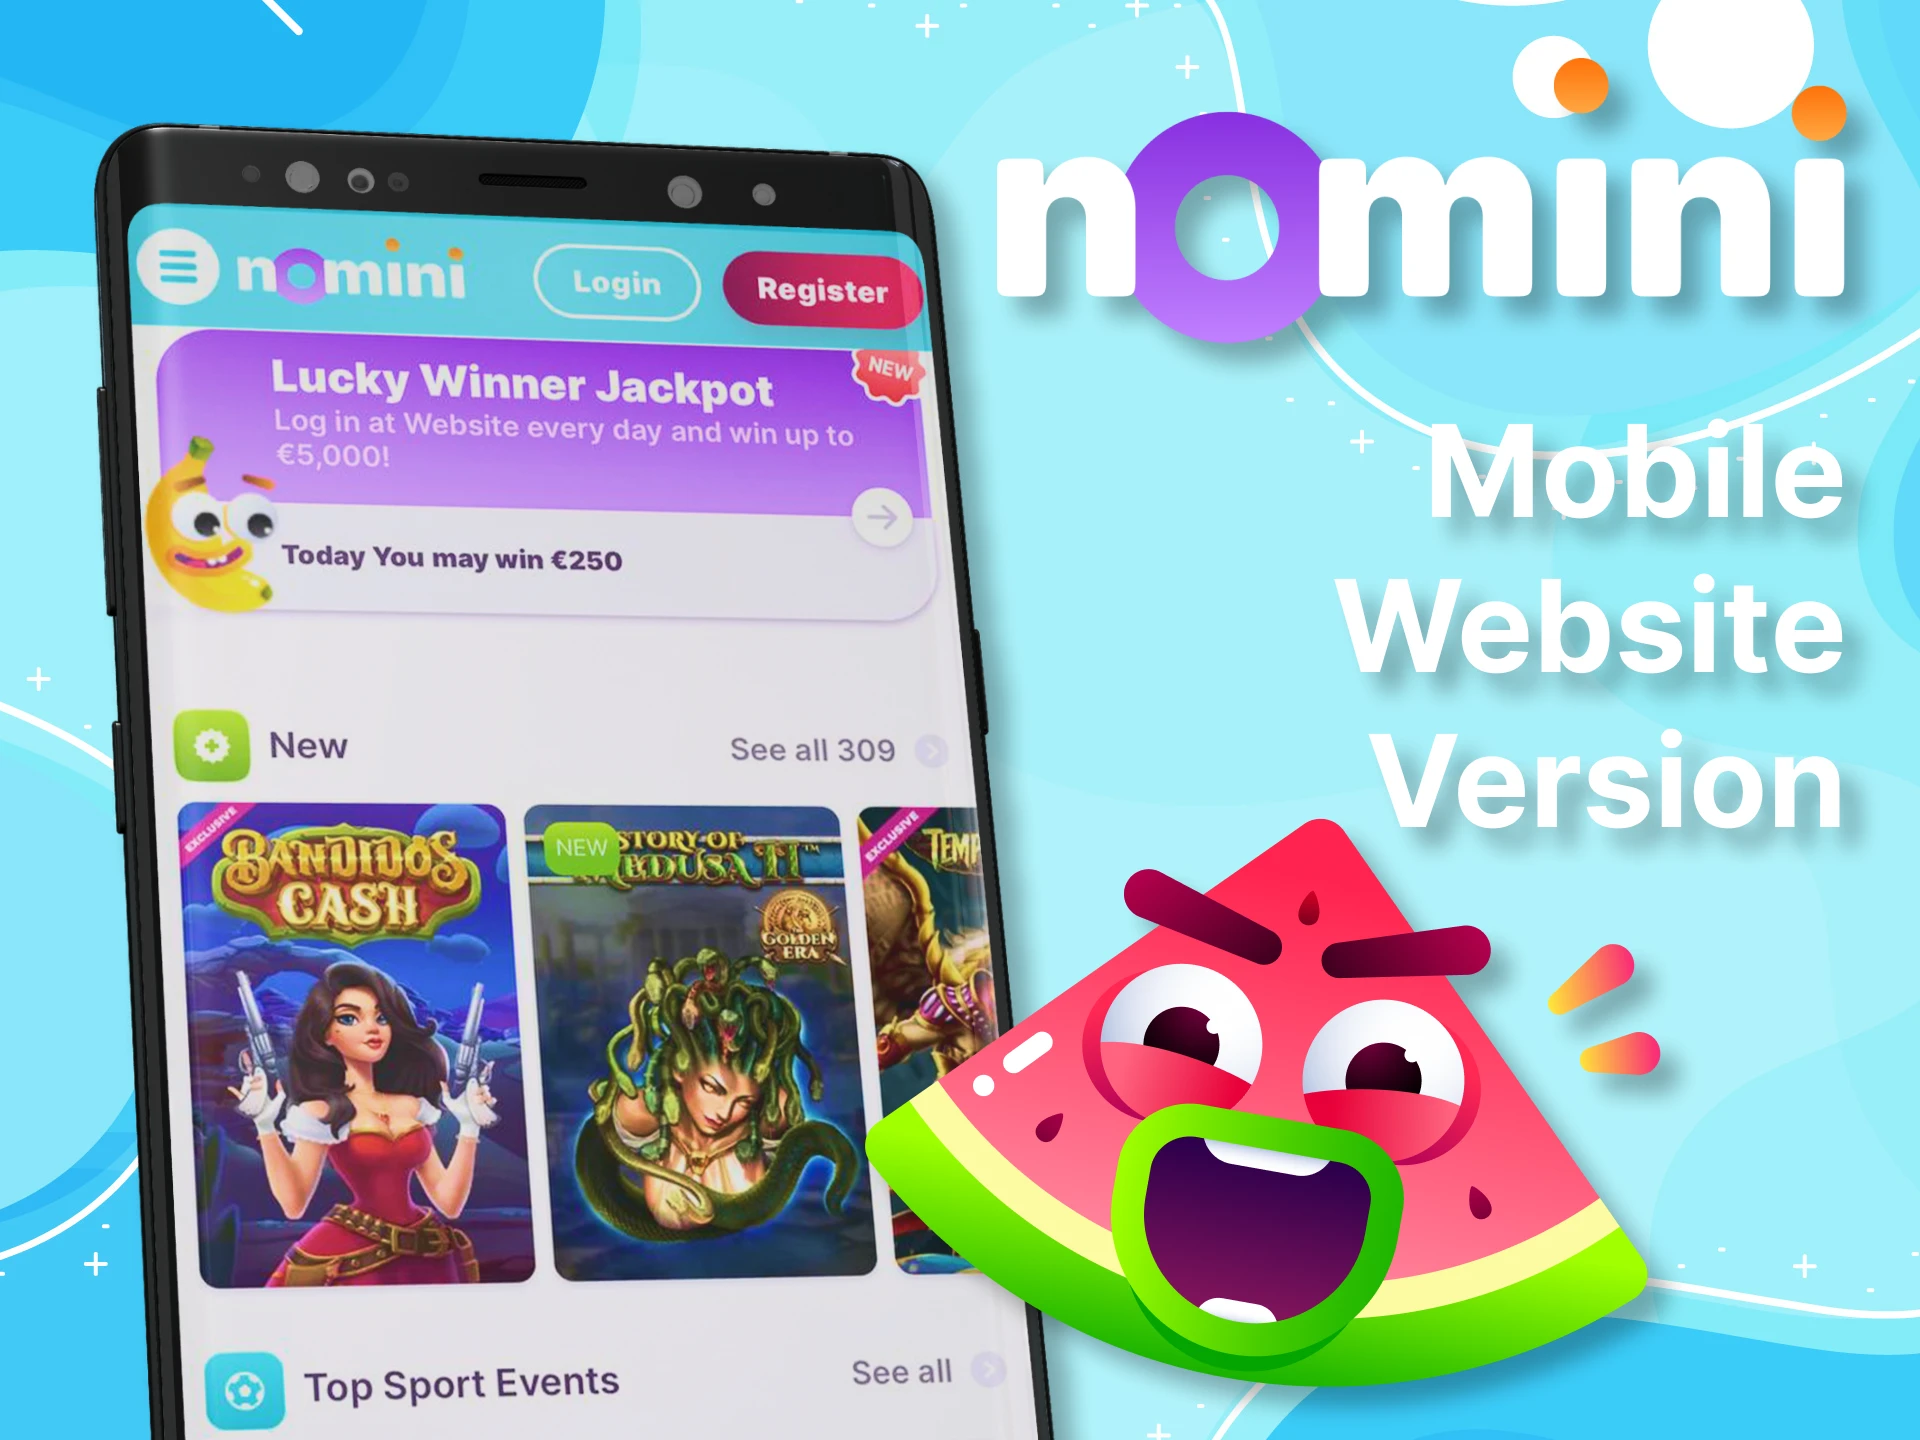 Play casino and sports betting with Nomini via the mobile version of the website.